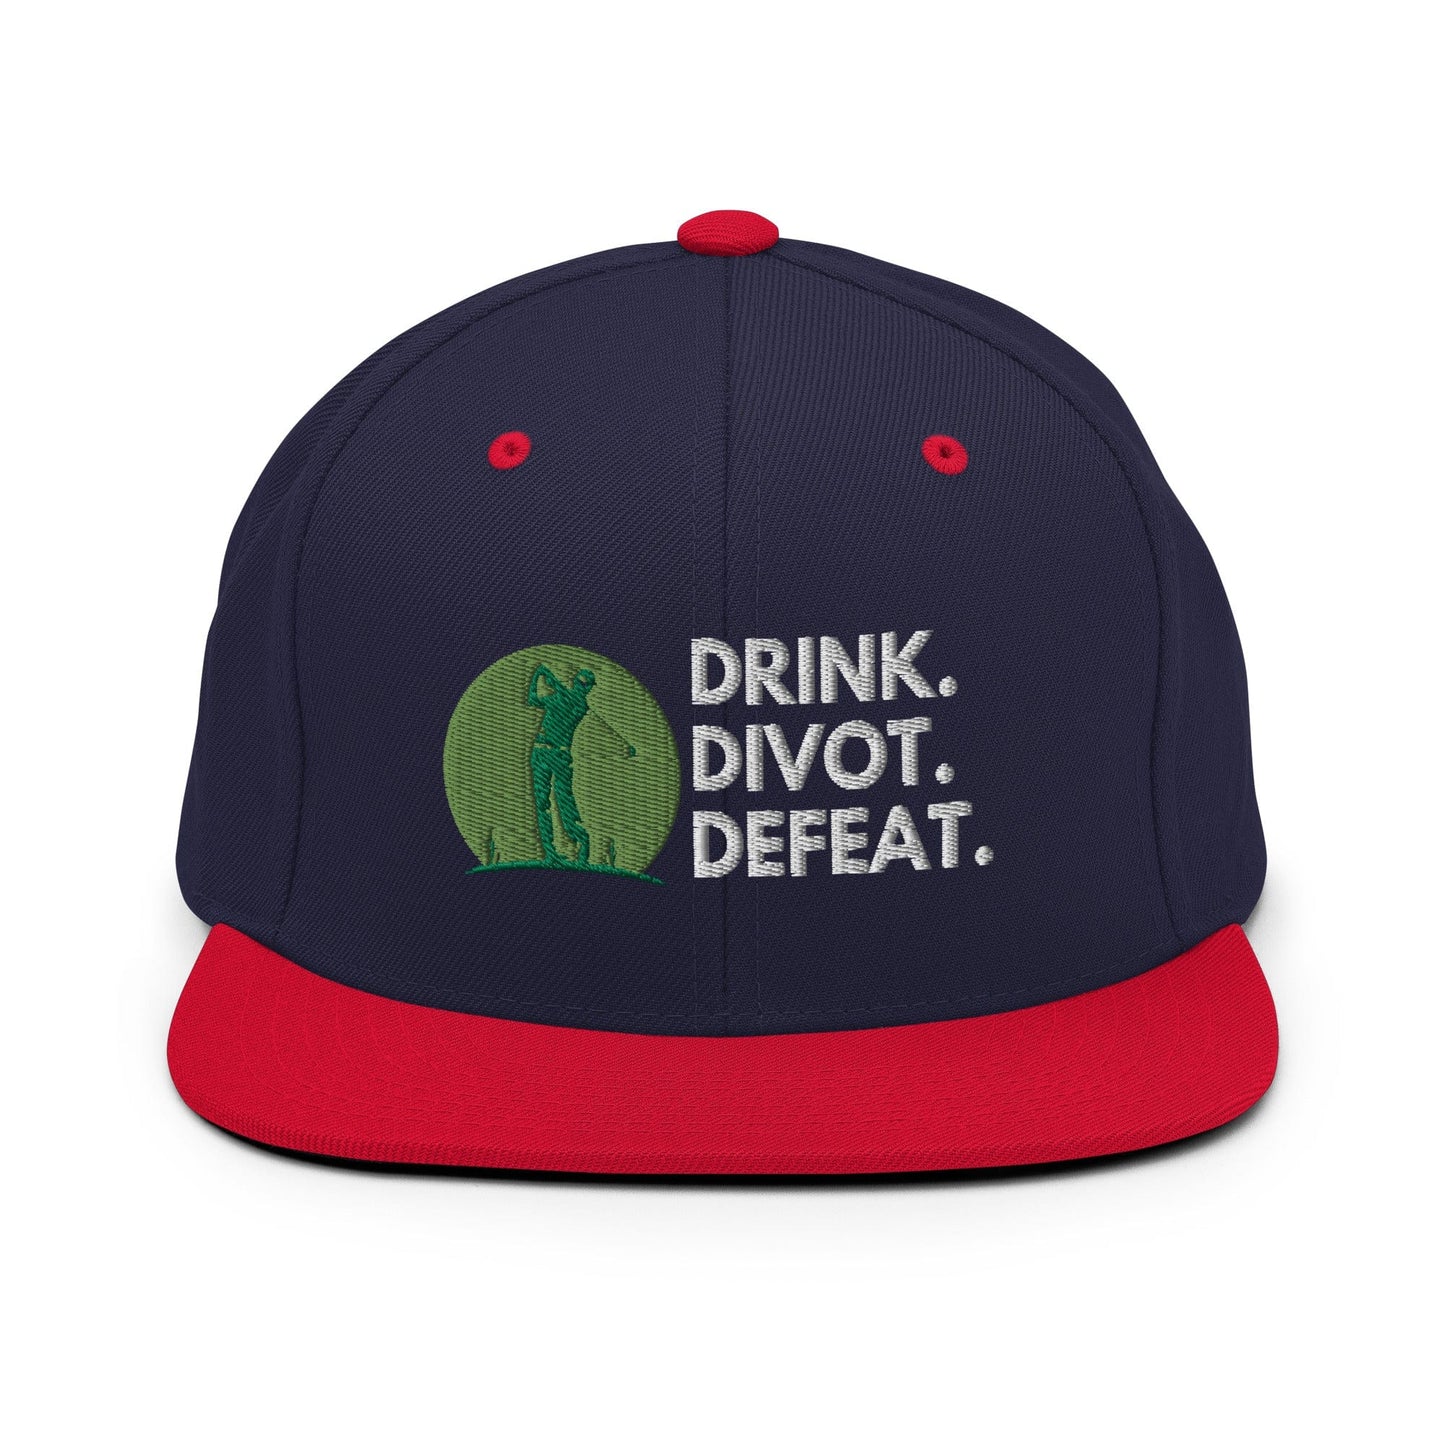 Funny Golfer Gifts  Snapback Hat Navy/ Red Drink. Divot. Defeat Snapback Hat